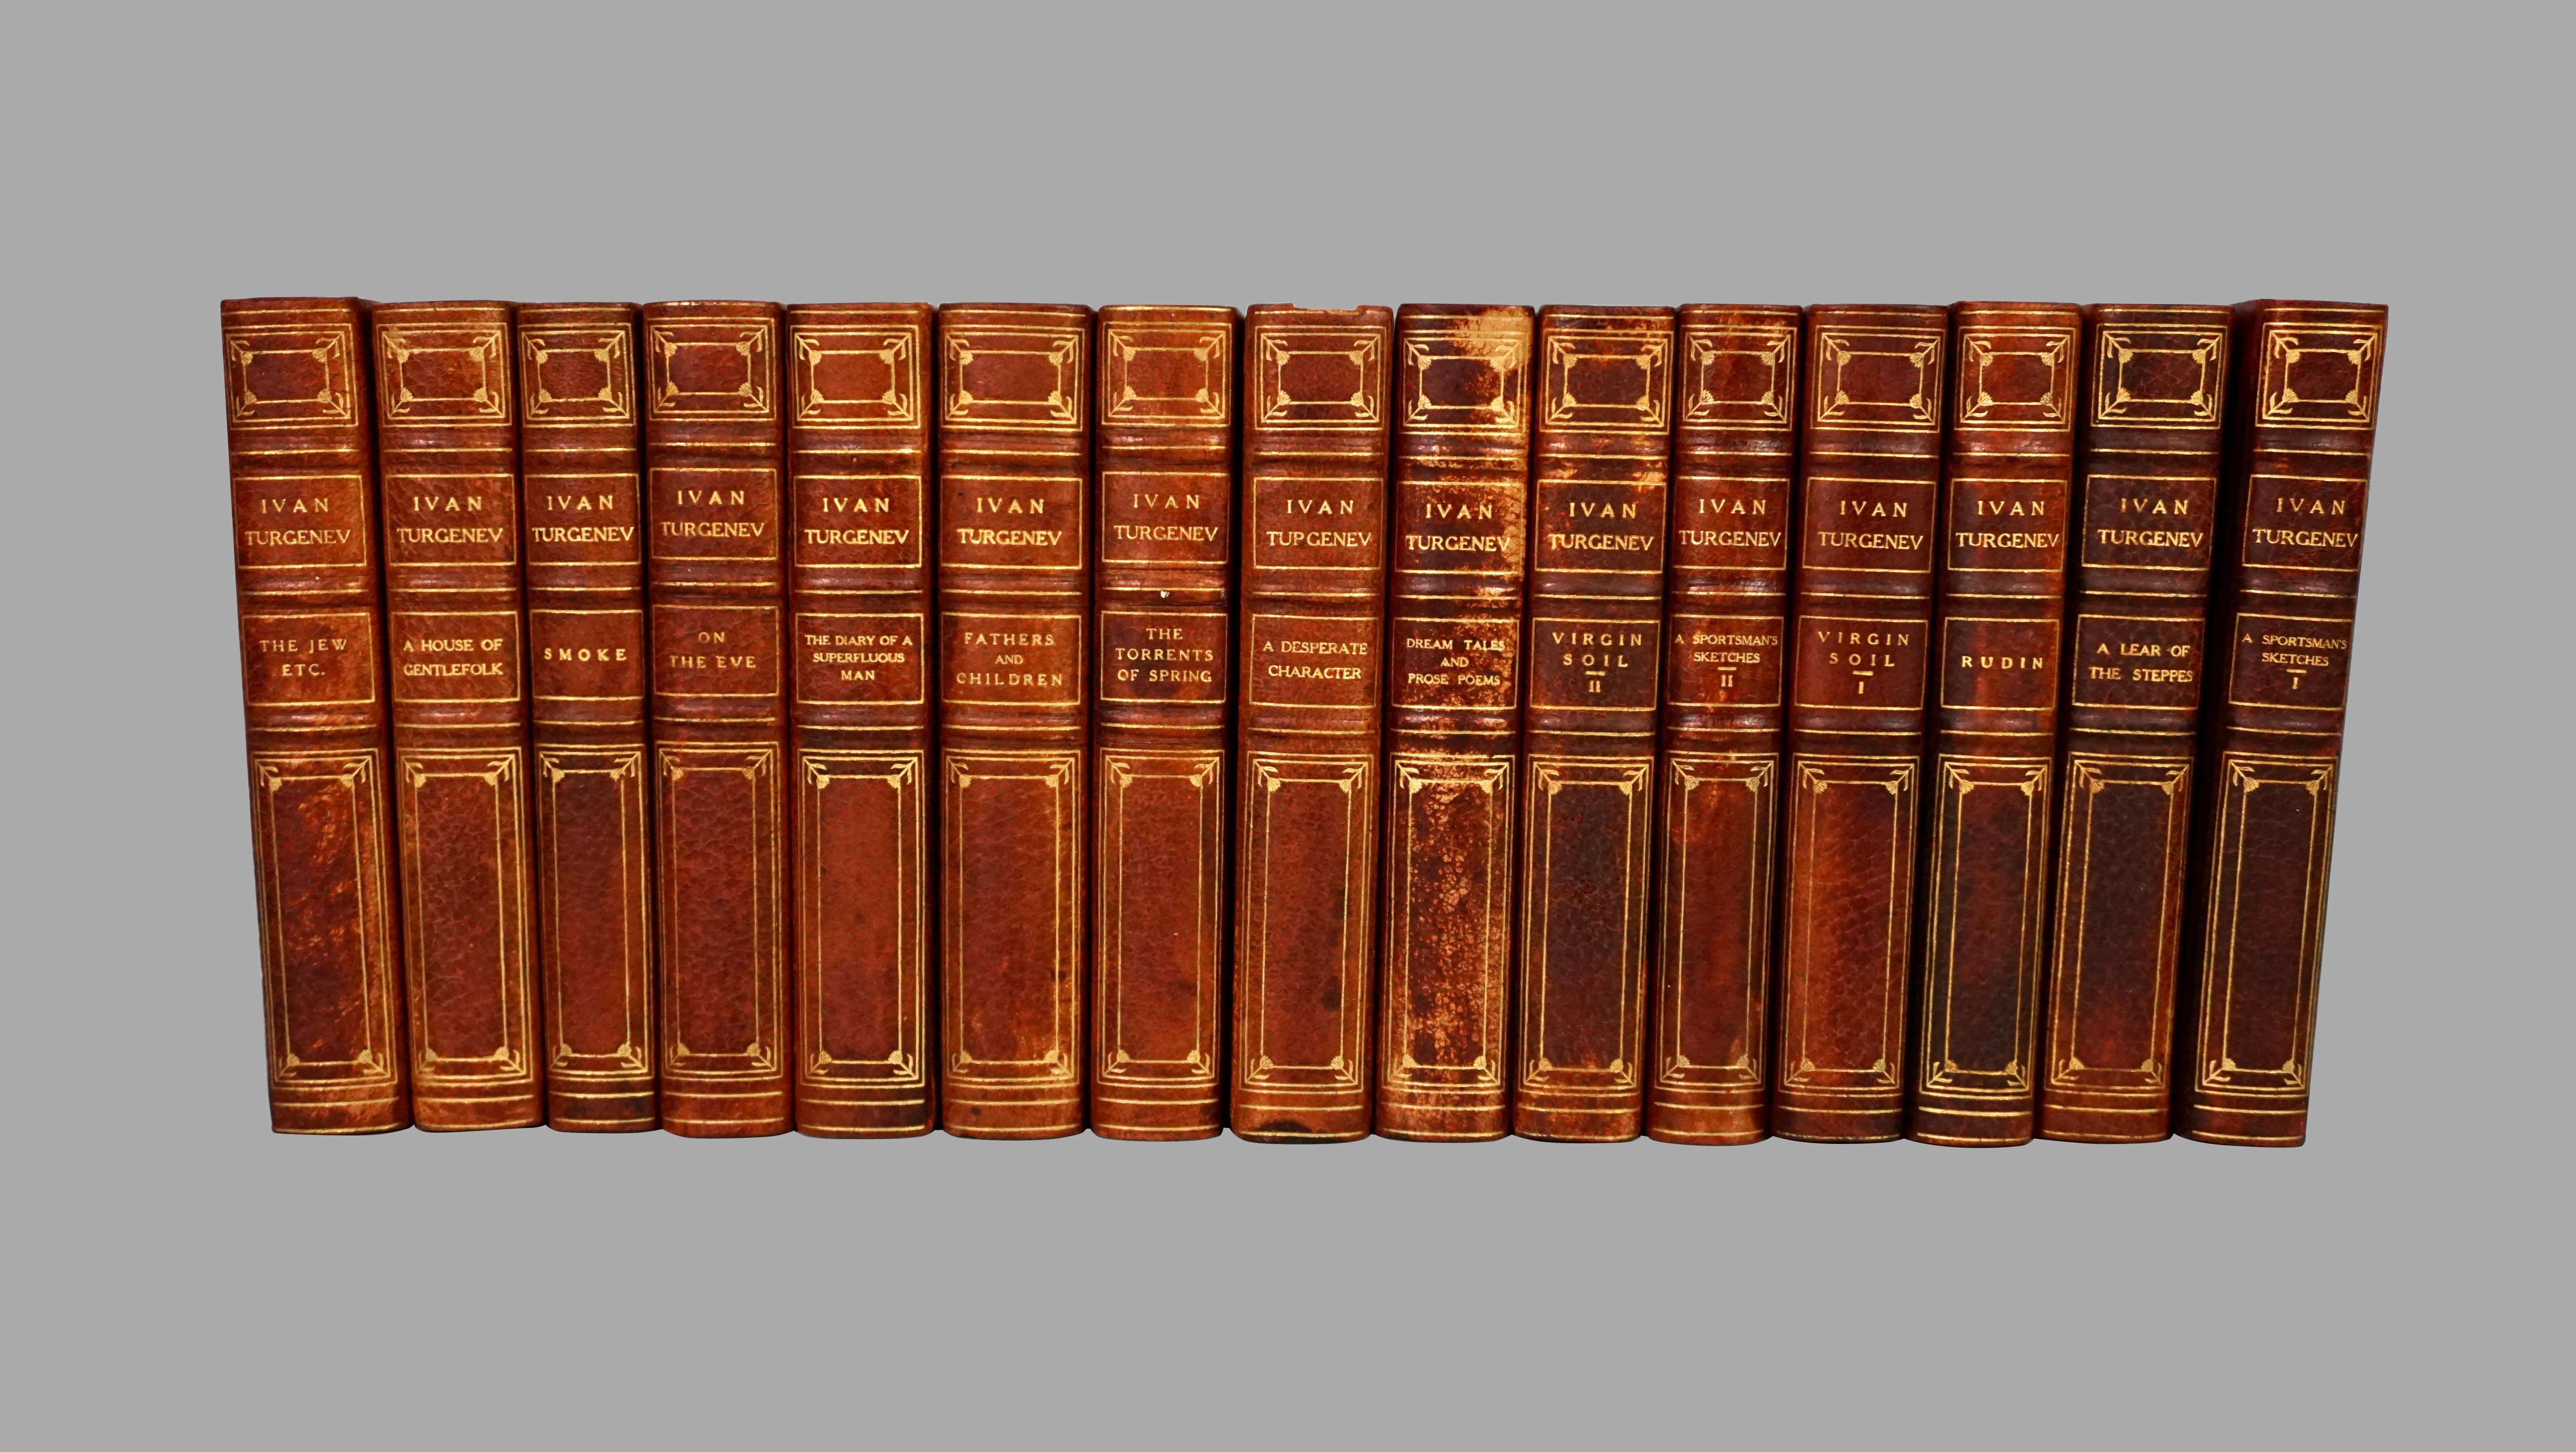 The Works of Ivan Turgenev (1818-1883) in 15 volumes, the large type fine paper edition, bound in 3/4 leather, published by William Heinemann, London 1916. Includes the author's most prominent works. Turgenev was a famous novelist, poet and